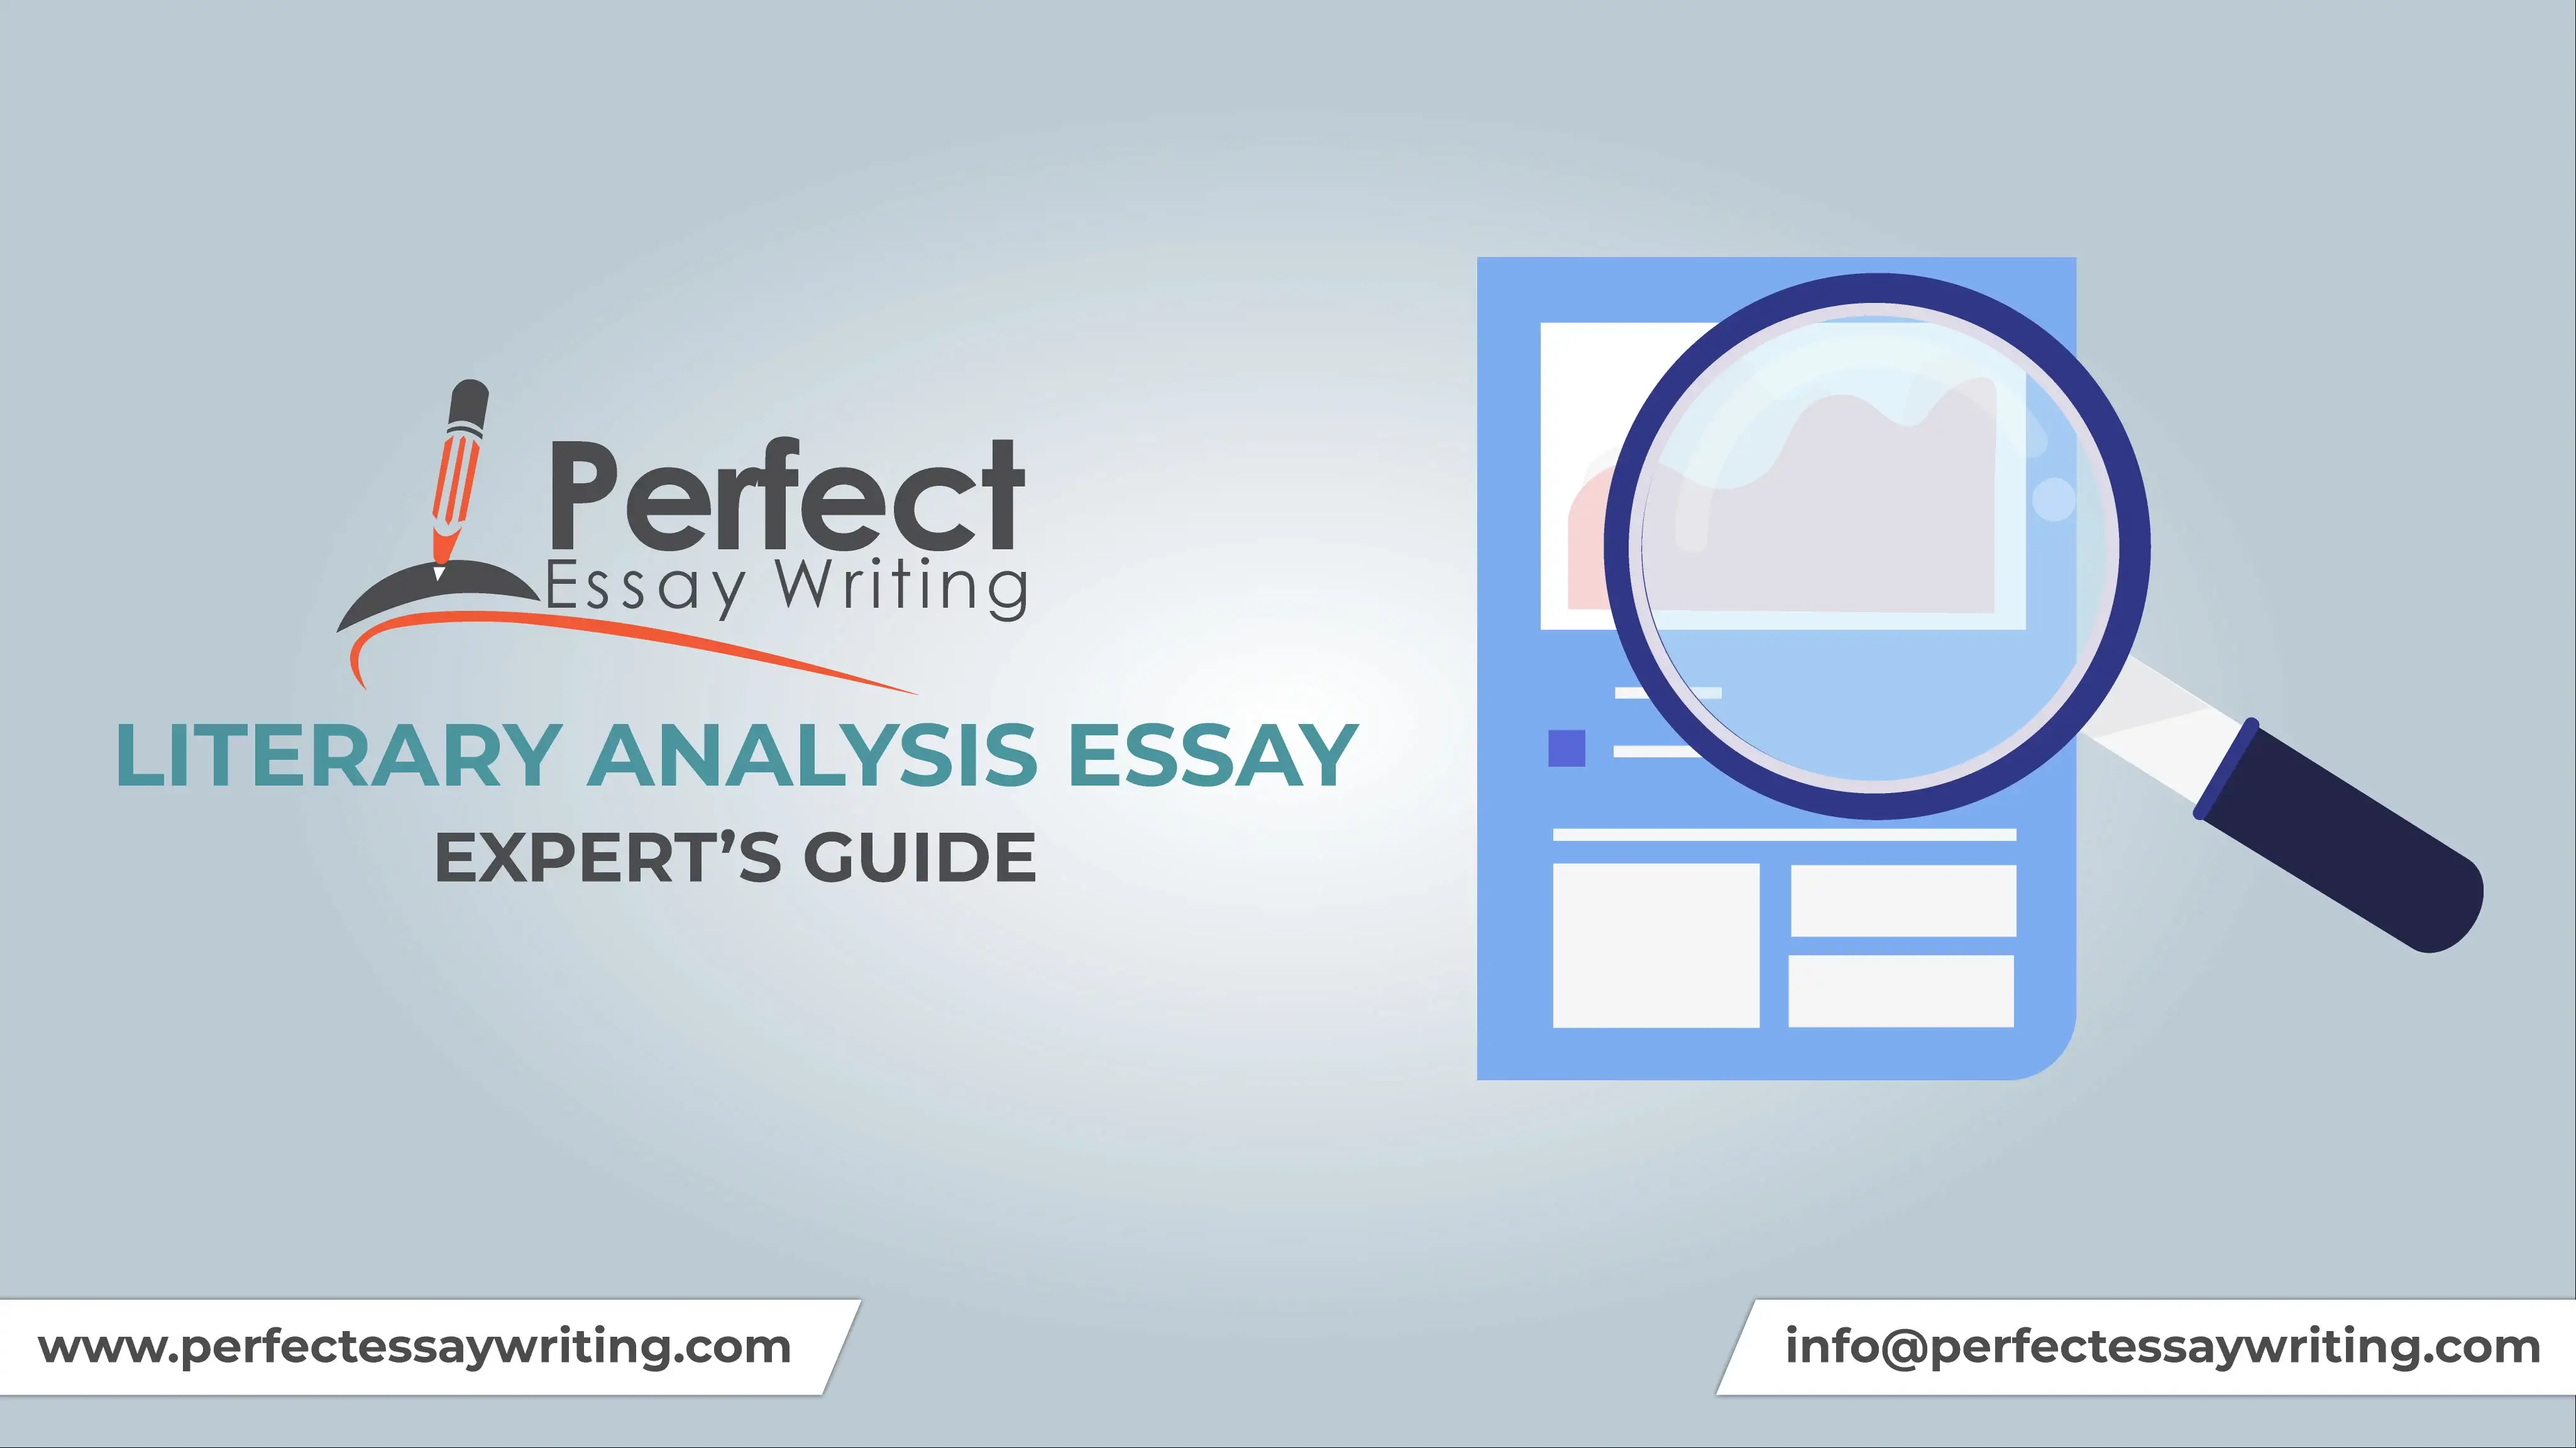 Literary Analysis Essay - Experts Guide